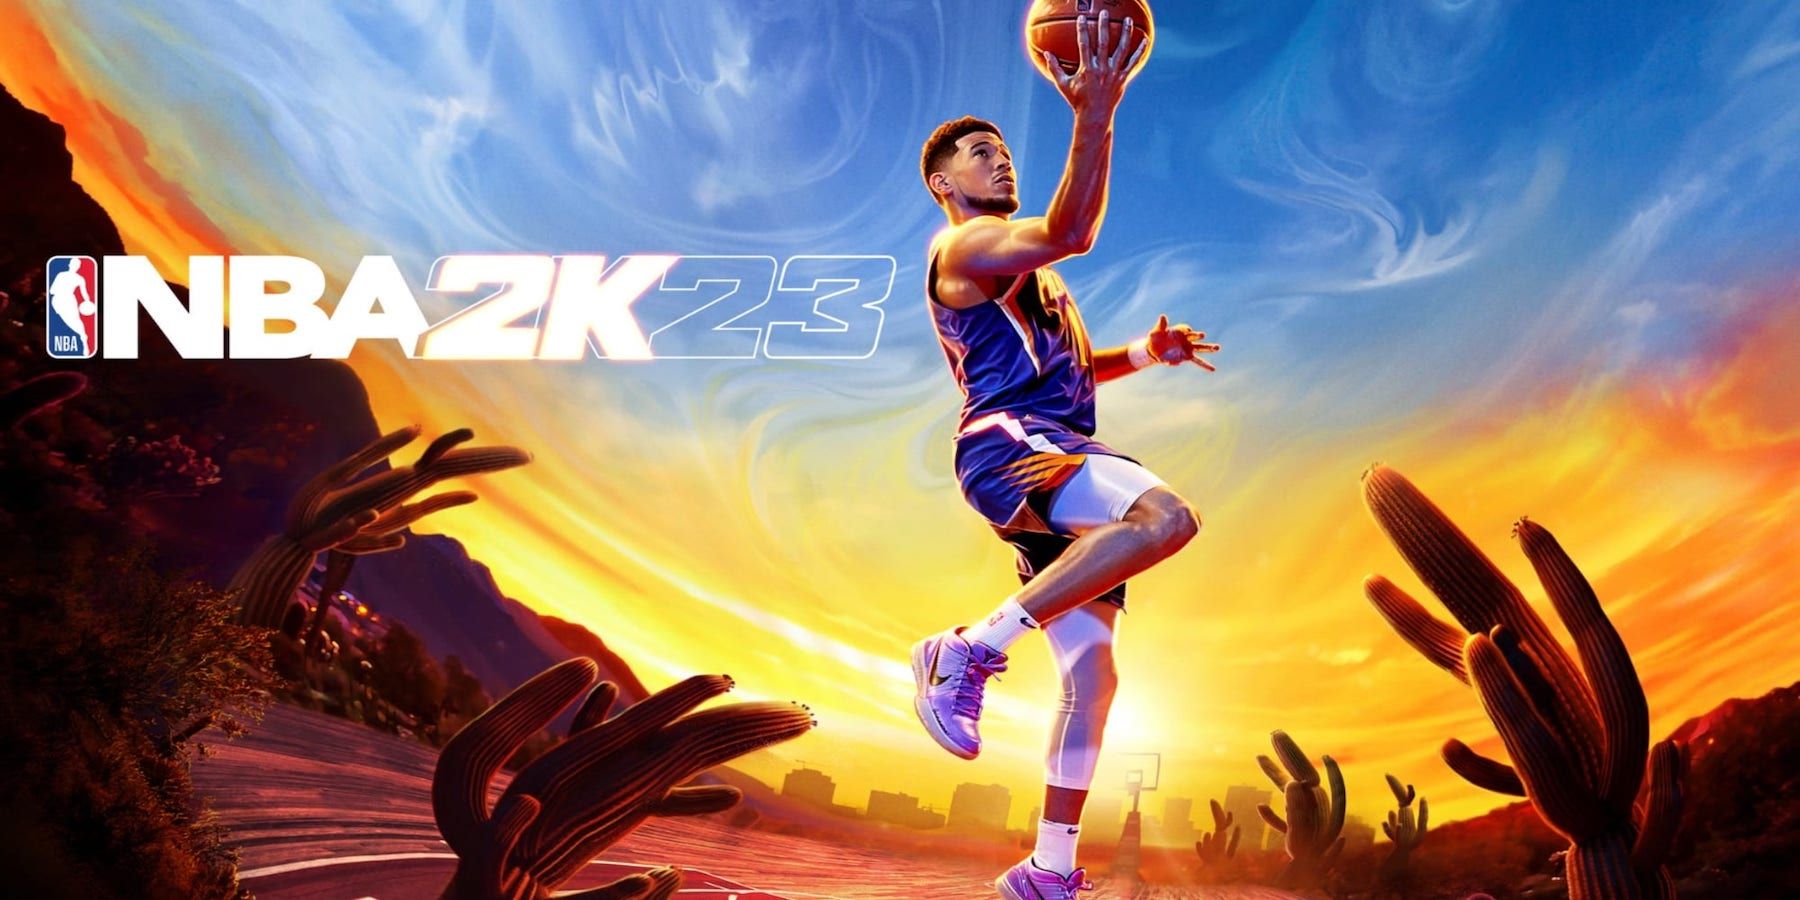 nba 2k23 cover athlete devin booker shooting a layup in the desert